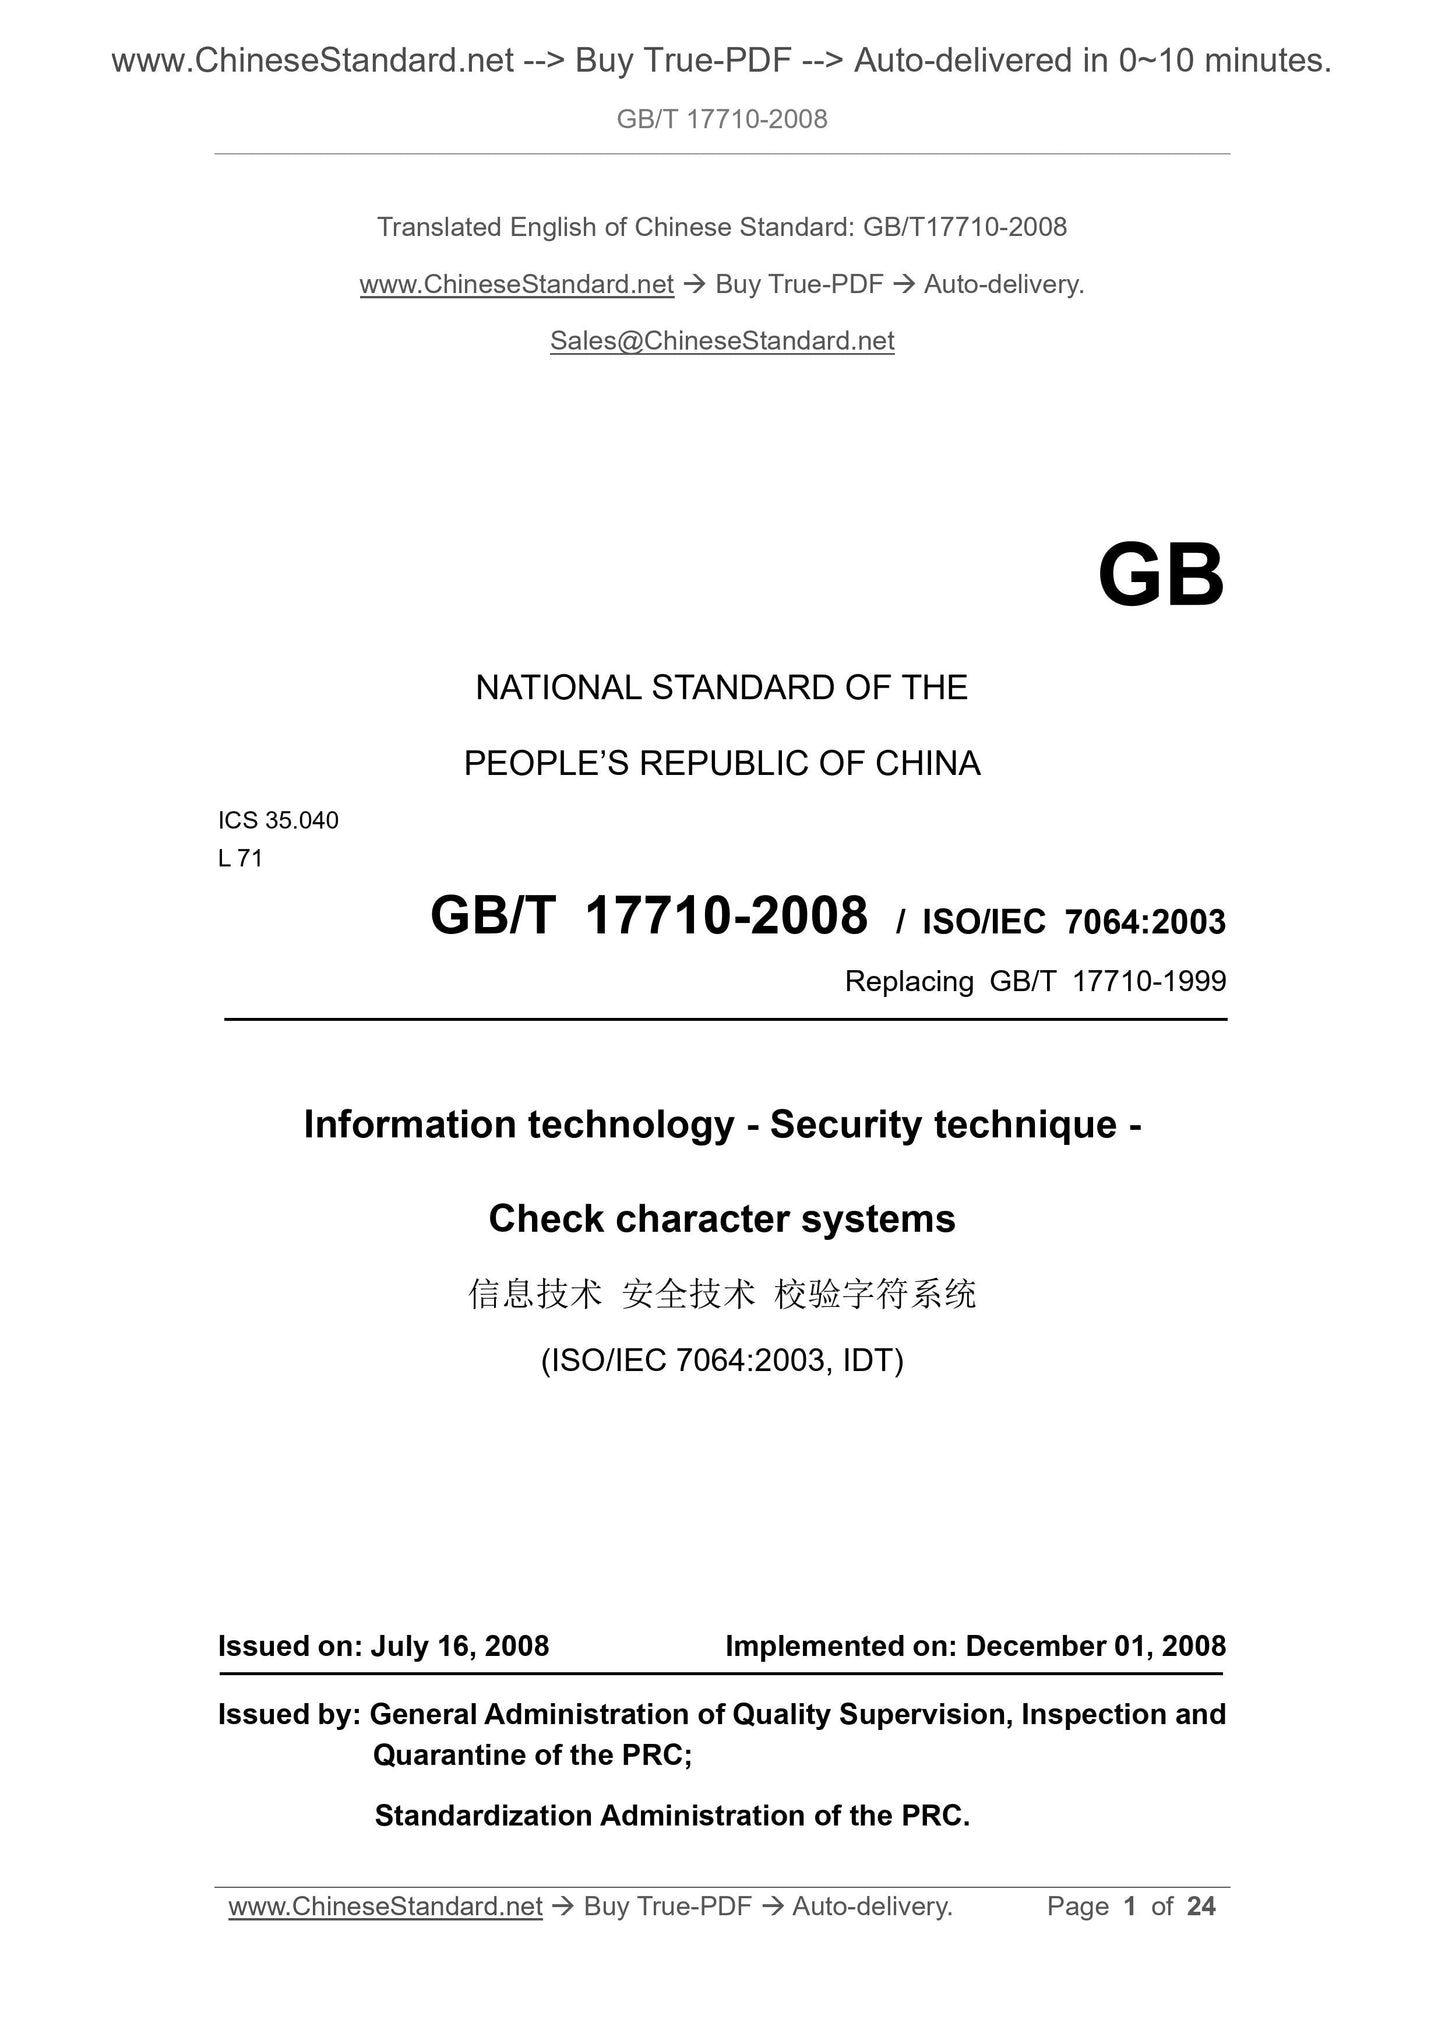 GB/T 17710-2008 Page 1